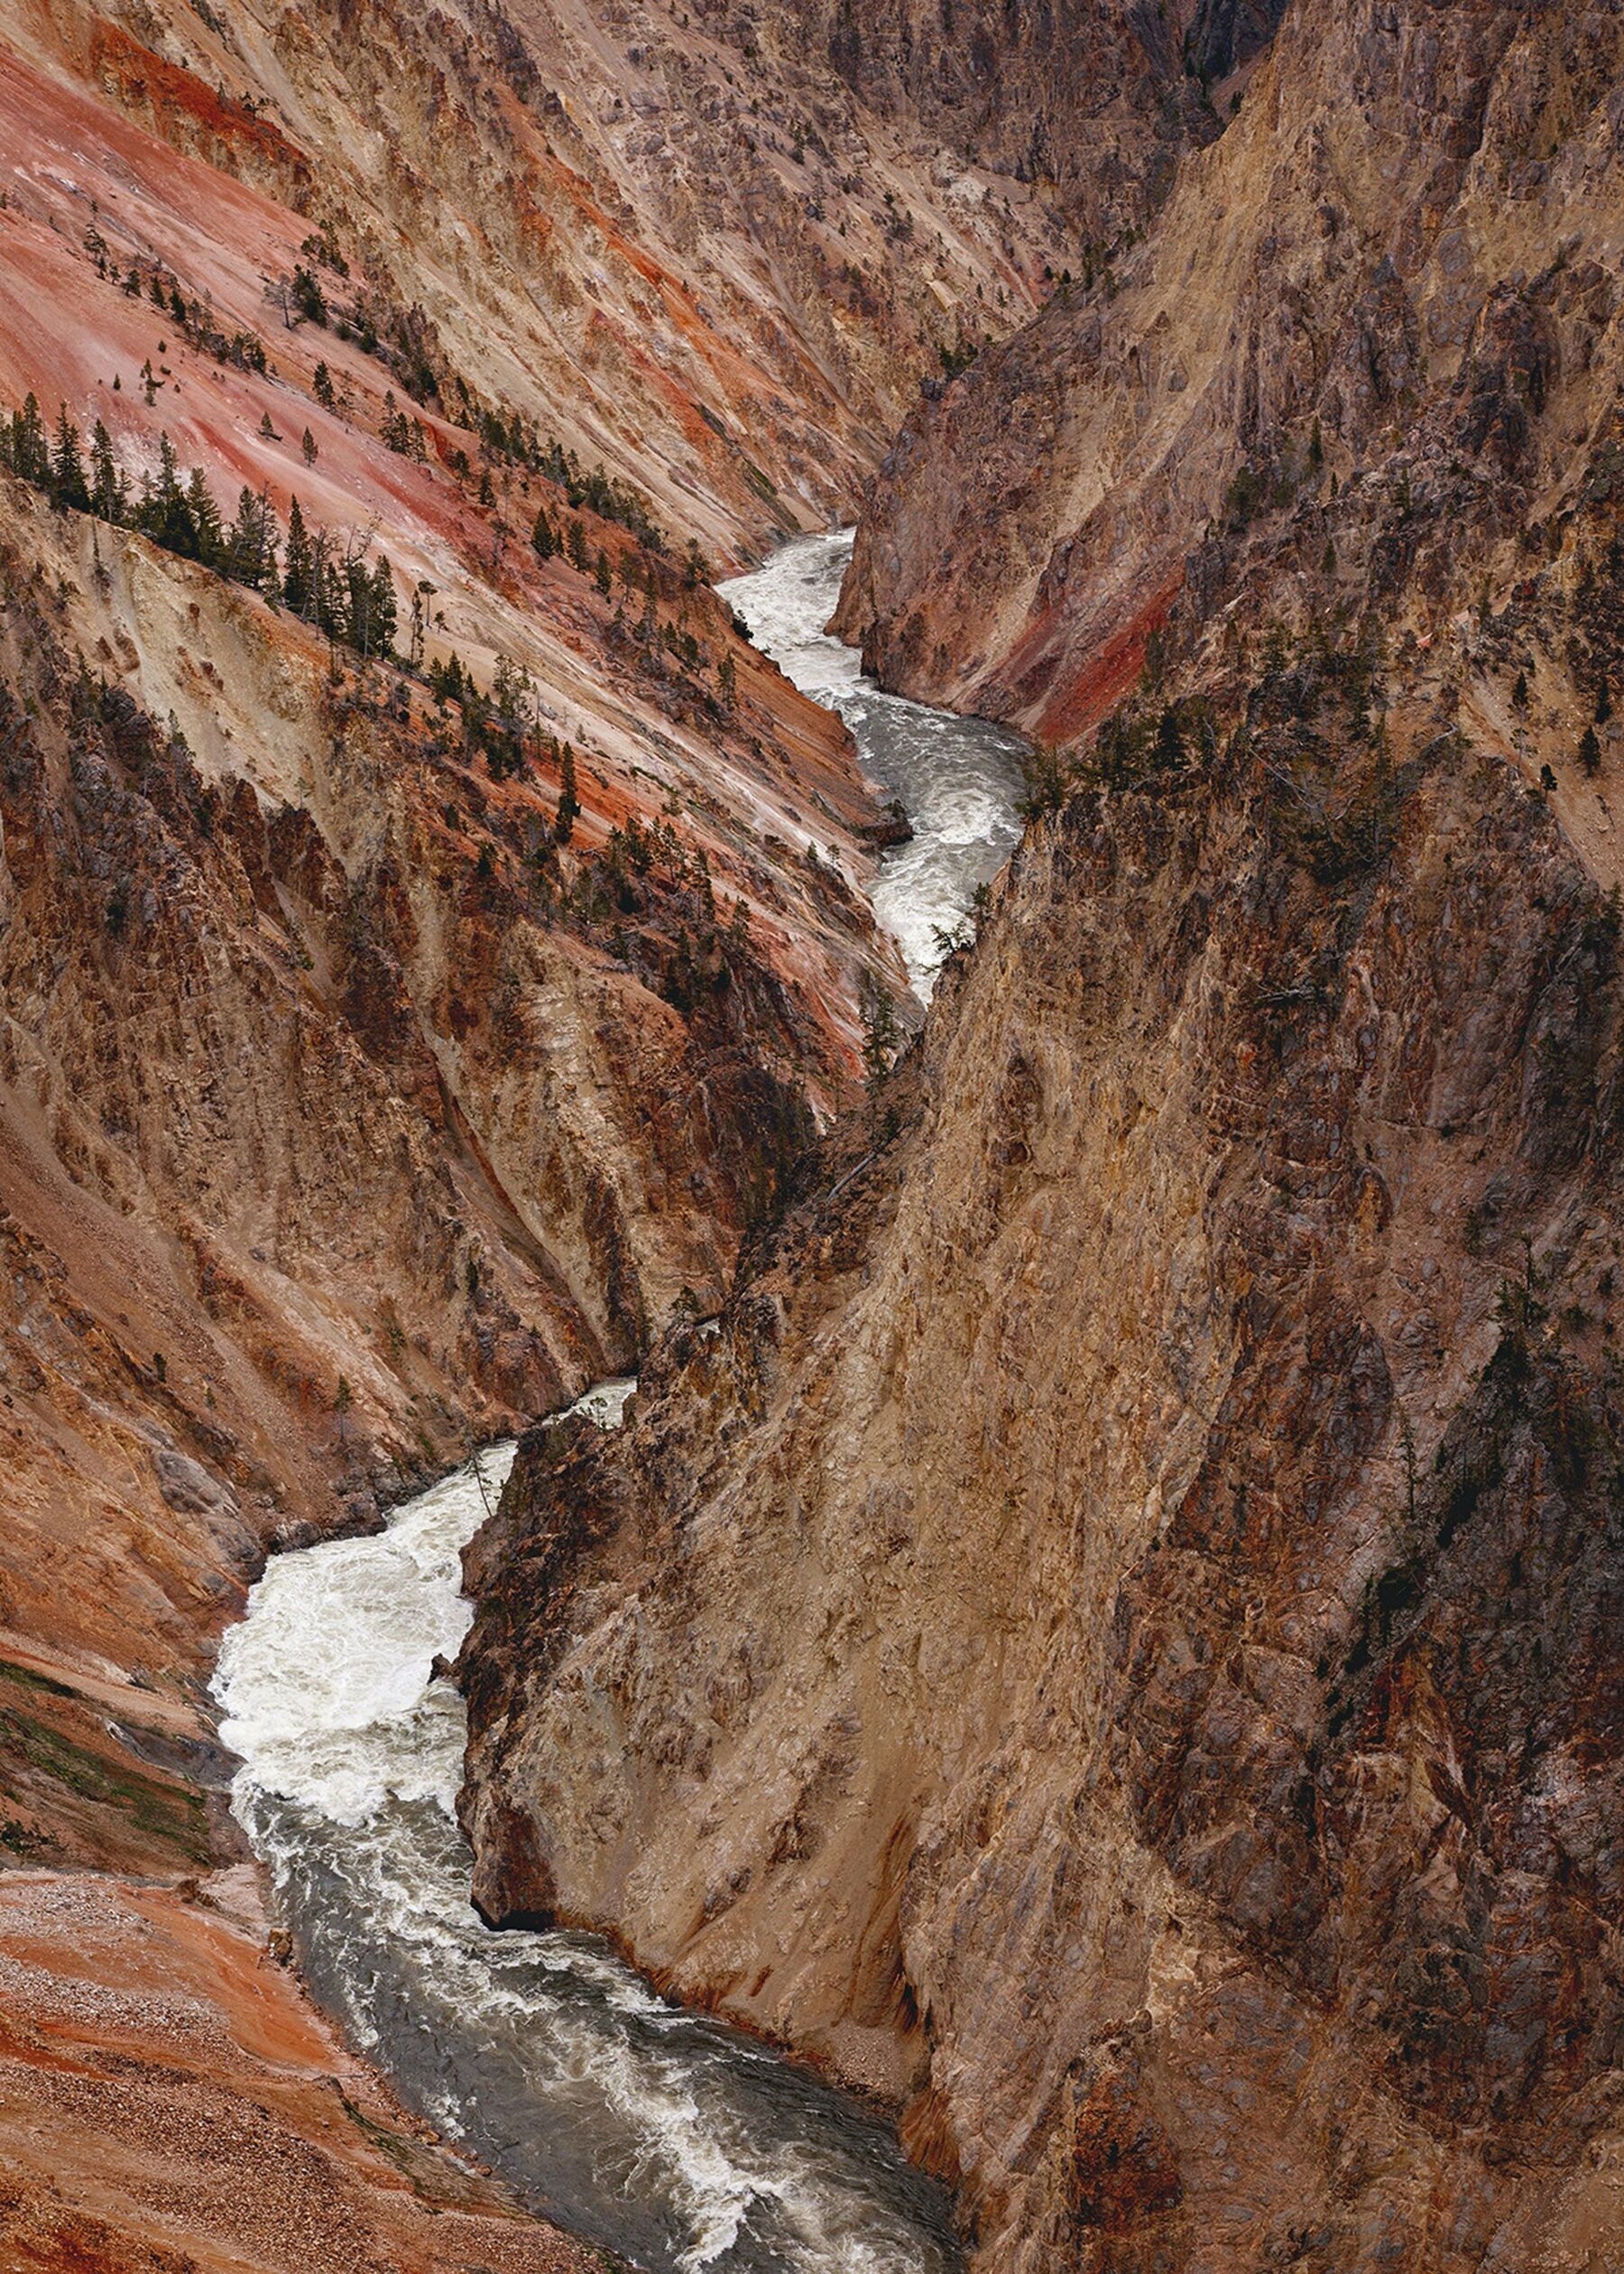 The Grand Canyon of Yellowstone in Yellowstone National Park, Wyoming